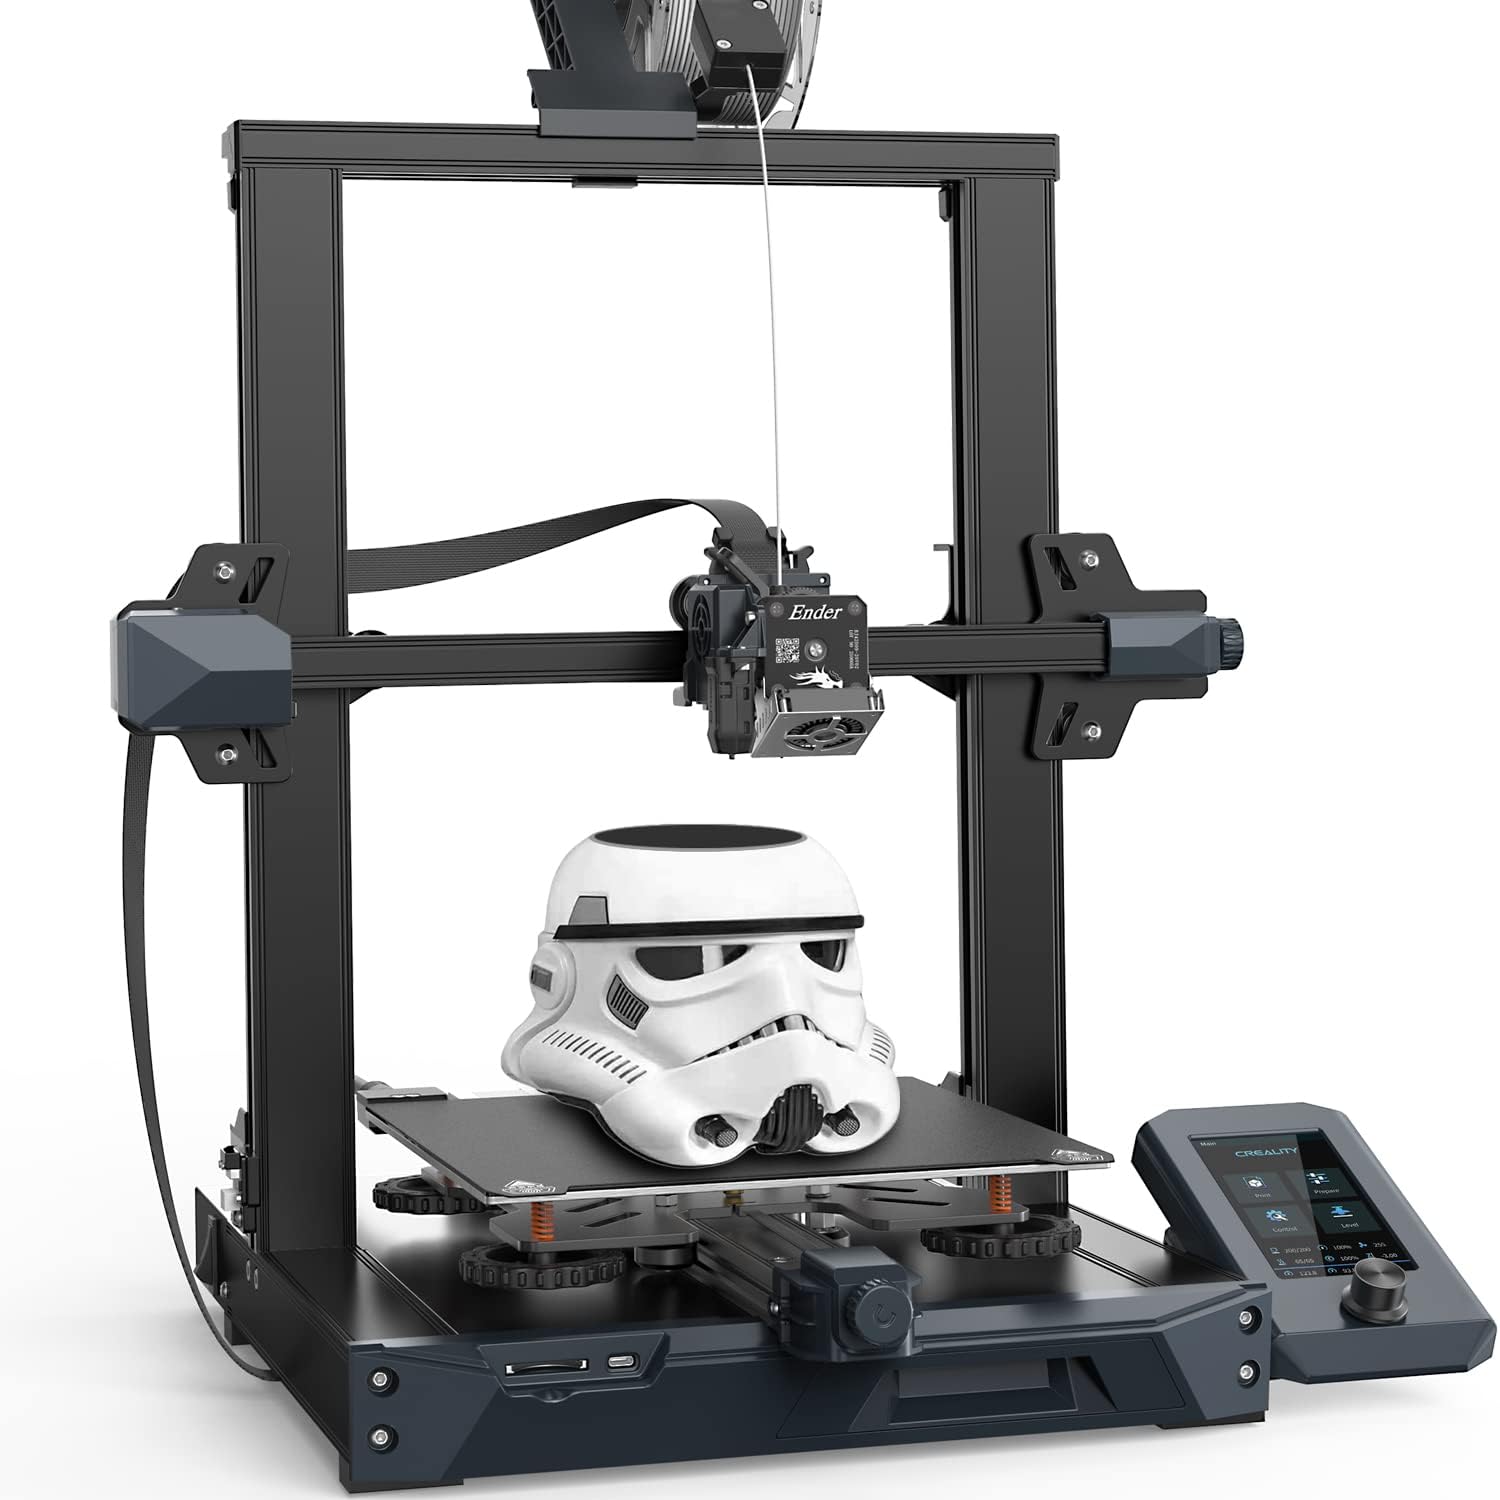 Official Creality Ender 3 S1 3D Printer, Upgraded [...]